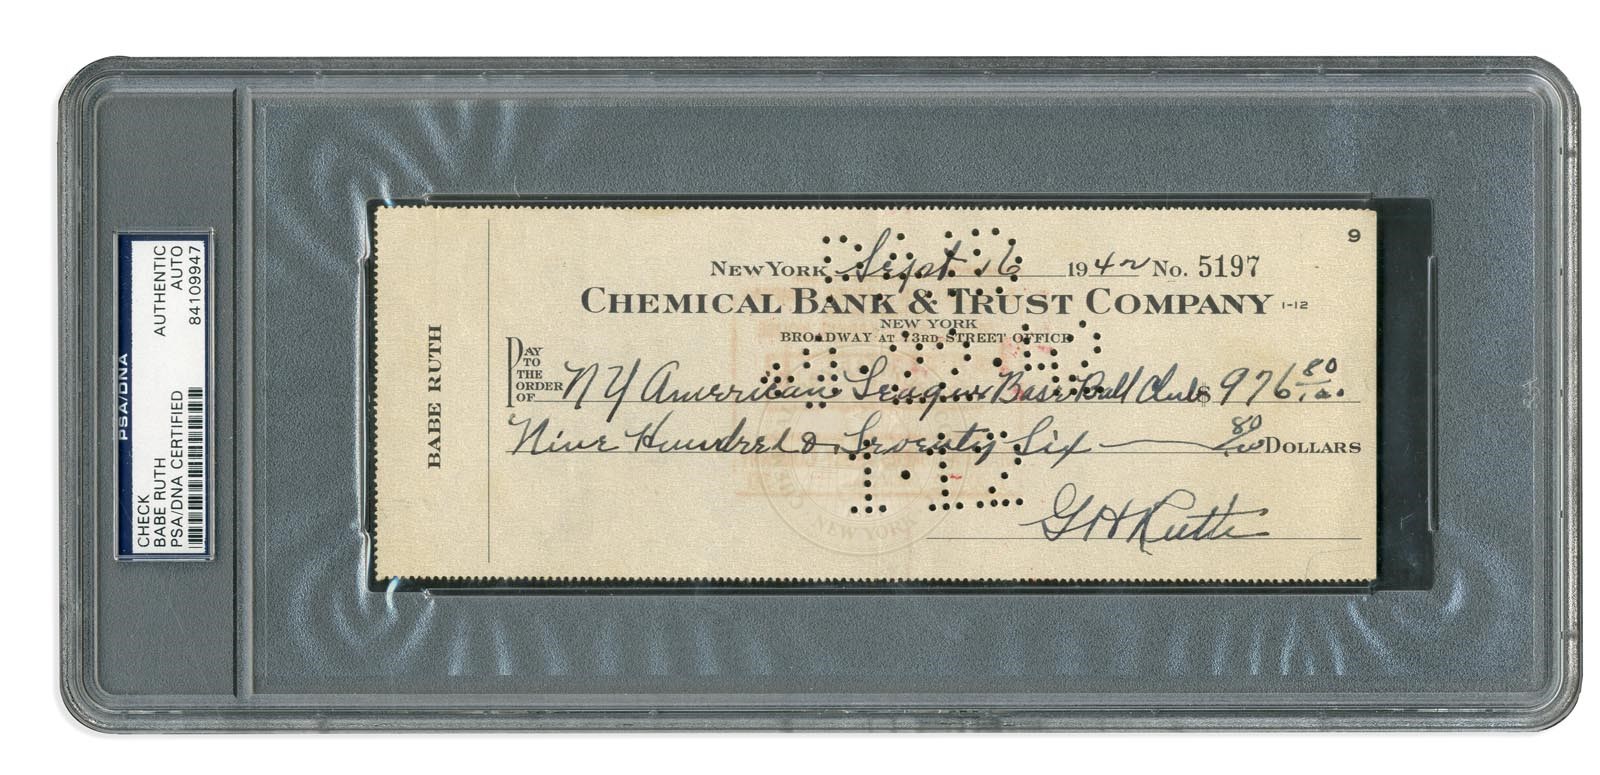 1942 Babe Ruth Bank Check Made Out To The New York Yankees (PSA)